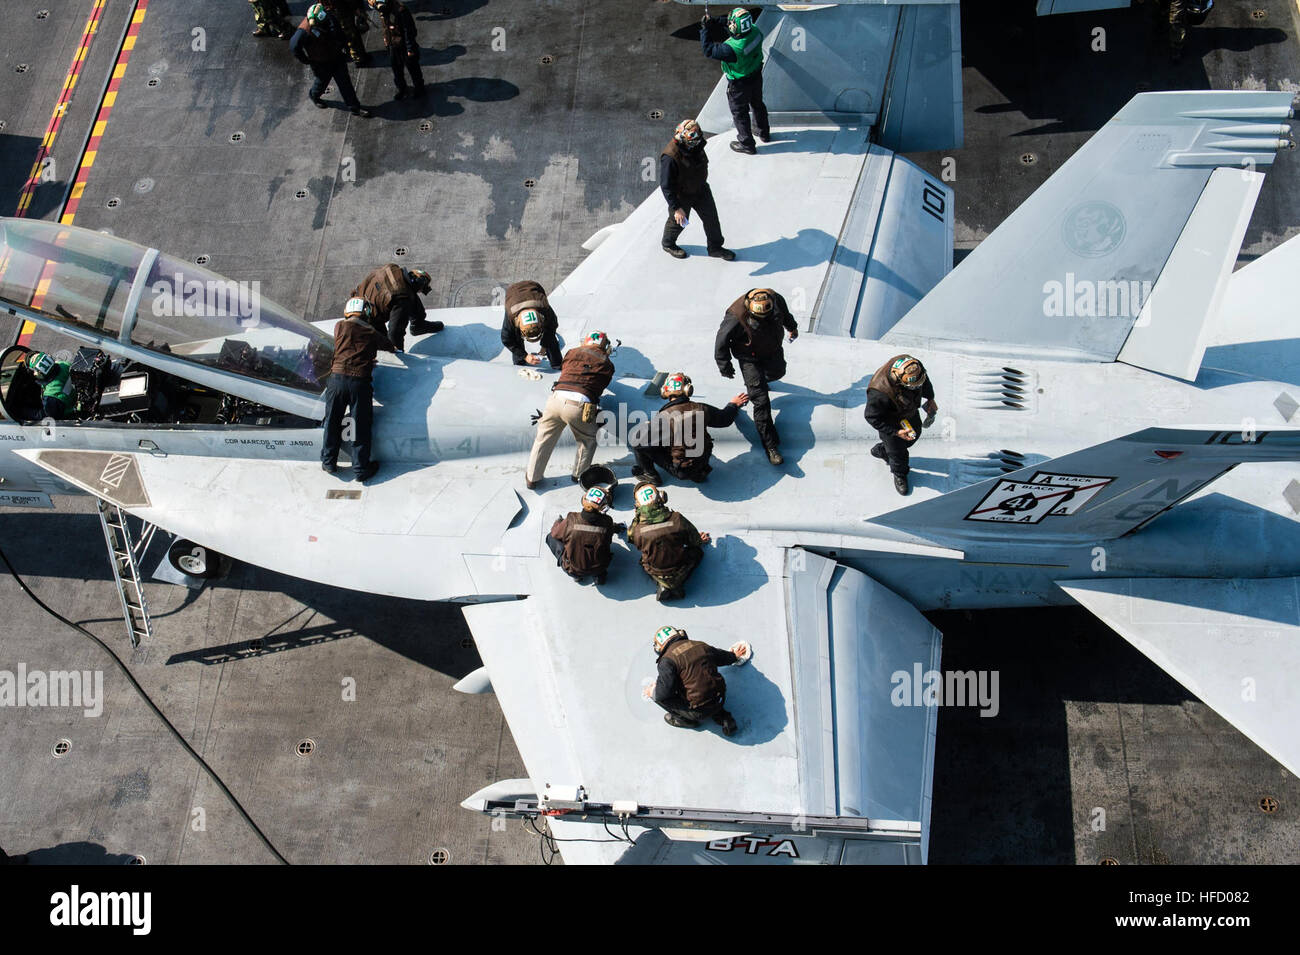 WATERS SURROUNDING THE KOREAN PENINSULA (March 23, 2016) Sailors clean an F/A-18F Super Hornet assigned to the Black Aces of Strike Fighter Squadron (VFA) 41 on the flight deck of the aircraft carrier USS John C. Stennis (CVN 74). Providing a ready force supporting security and stability in the Indo-Asia-Pacific, John C. Stennis is operating as part of the Great Green Fleet on a regularly scheduled U.S. 7th Fleet deployment. (U.S. Navy photo by Mass Communication Specialist 3rd Class Andre T. Richard/Released) 160323-N-XX566-087  Join the conversation: http://www.navy.mil/viewGallery.asp http: Stock Photo